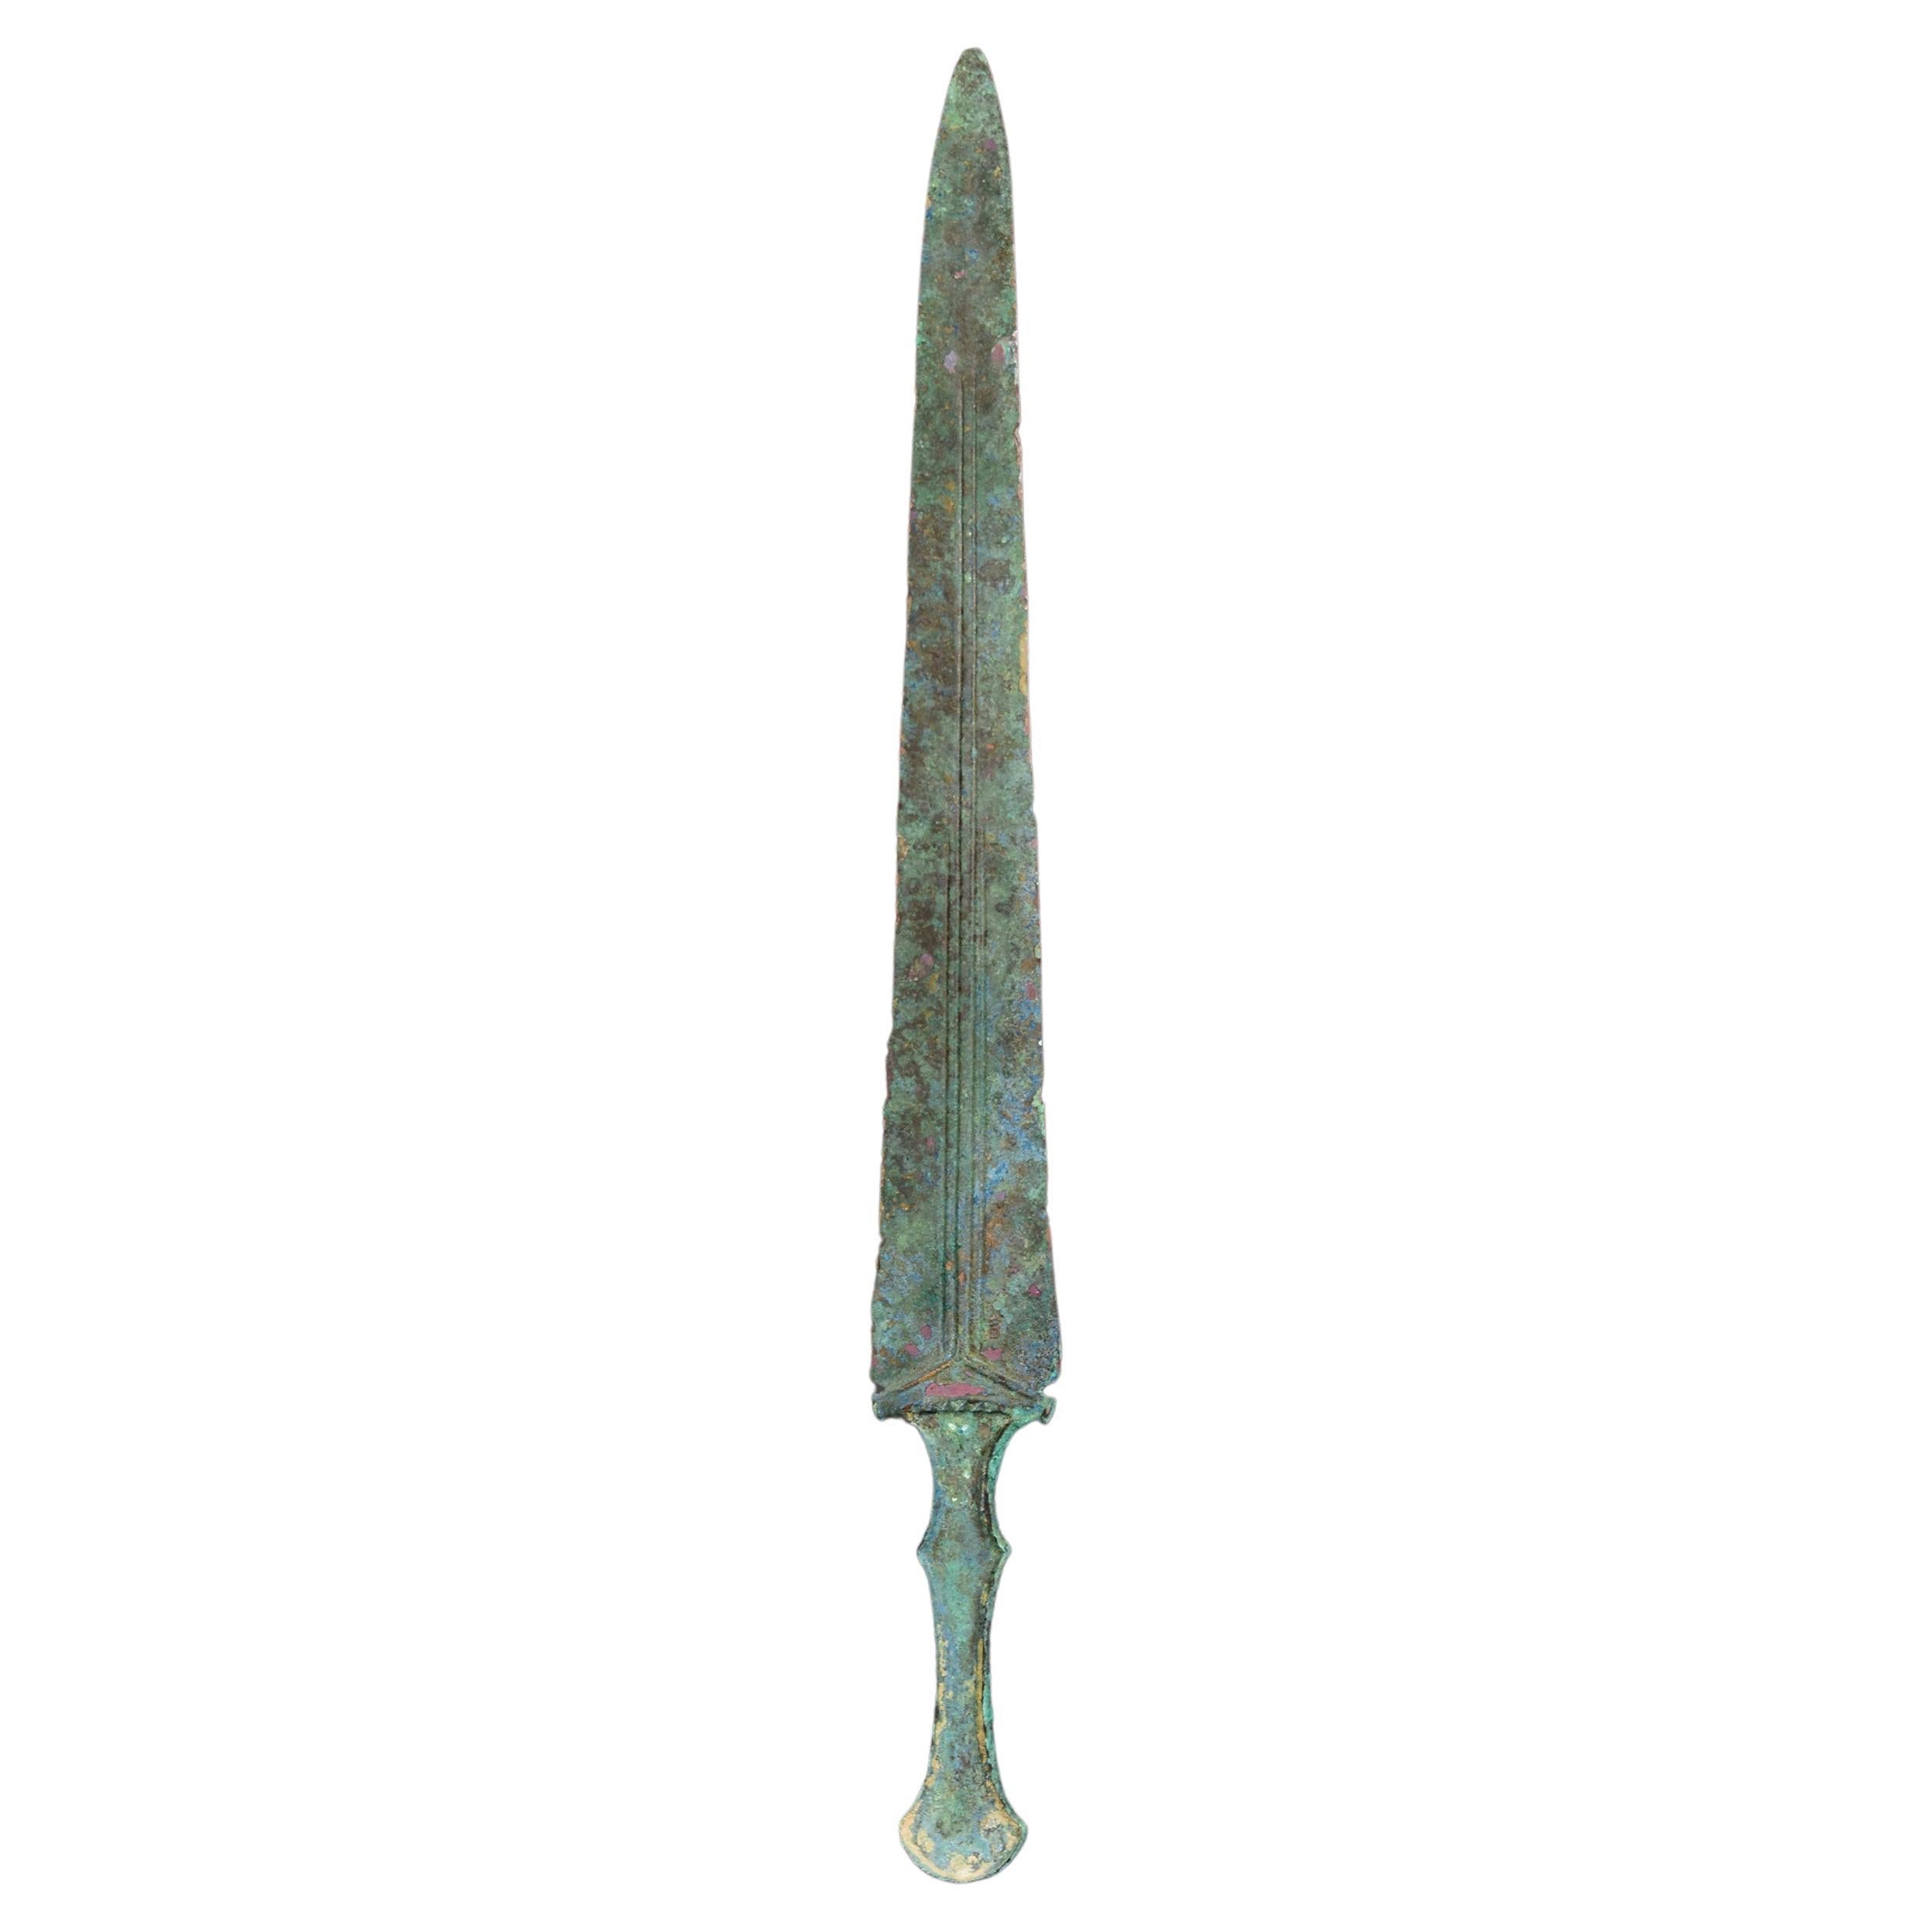 Ancient Luristan Bronze Short Sword / Knife / Early Iron Age Weapon